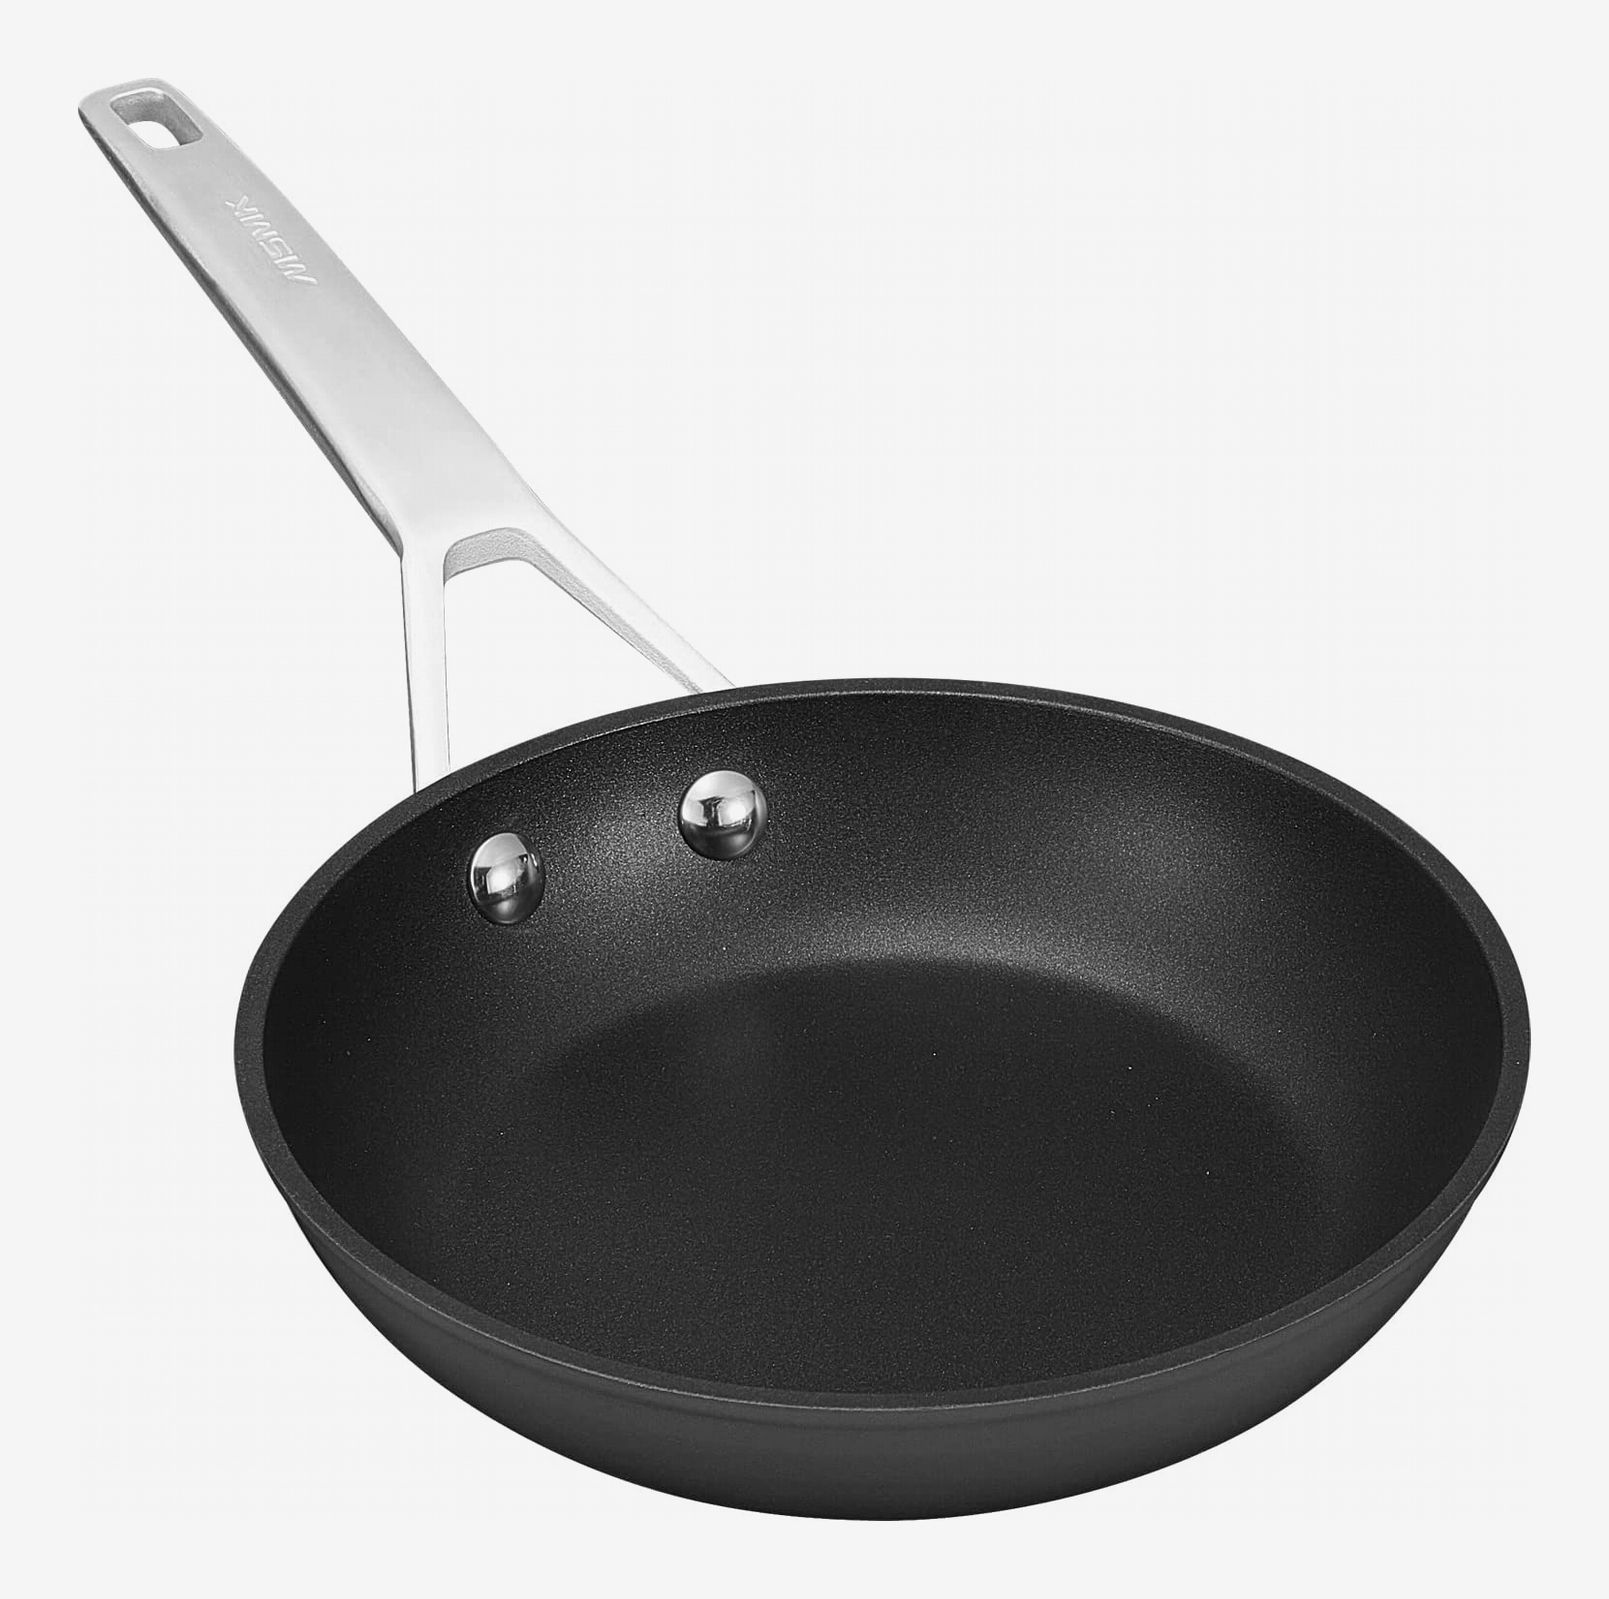 Best Frying Pan for Eggs ( We tested 7 Pans!) - Good Eats 101